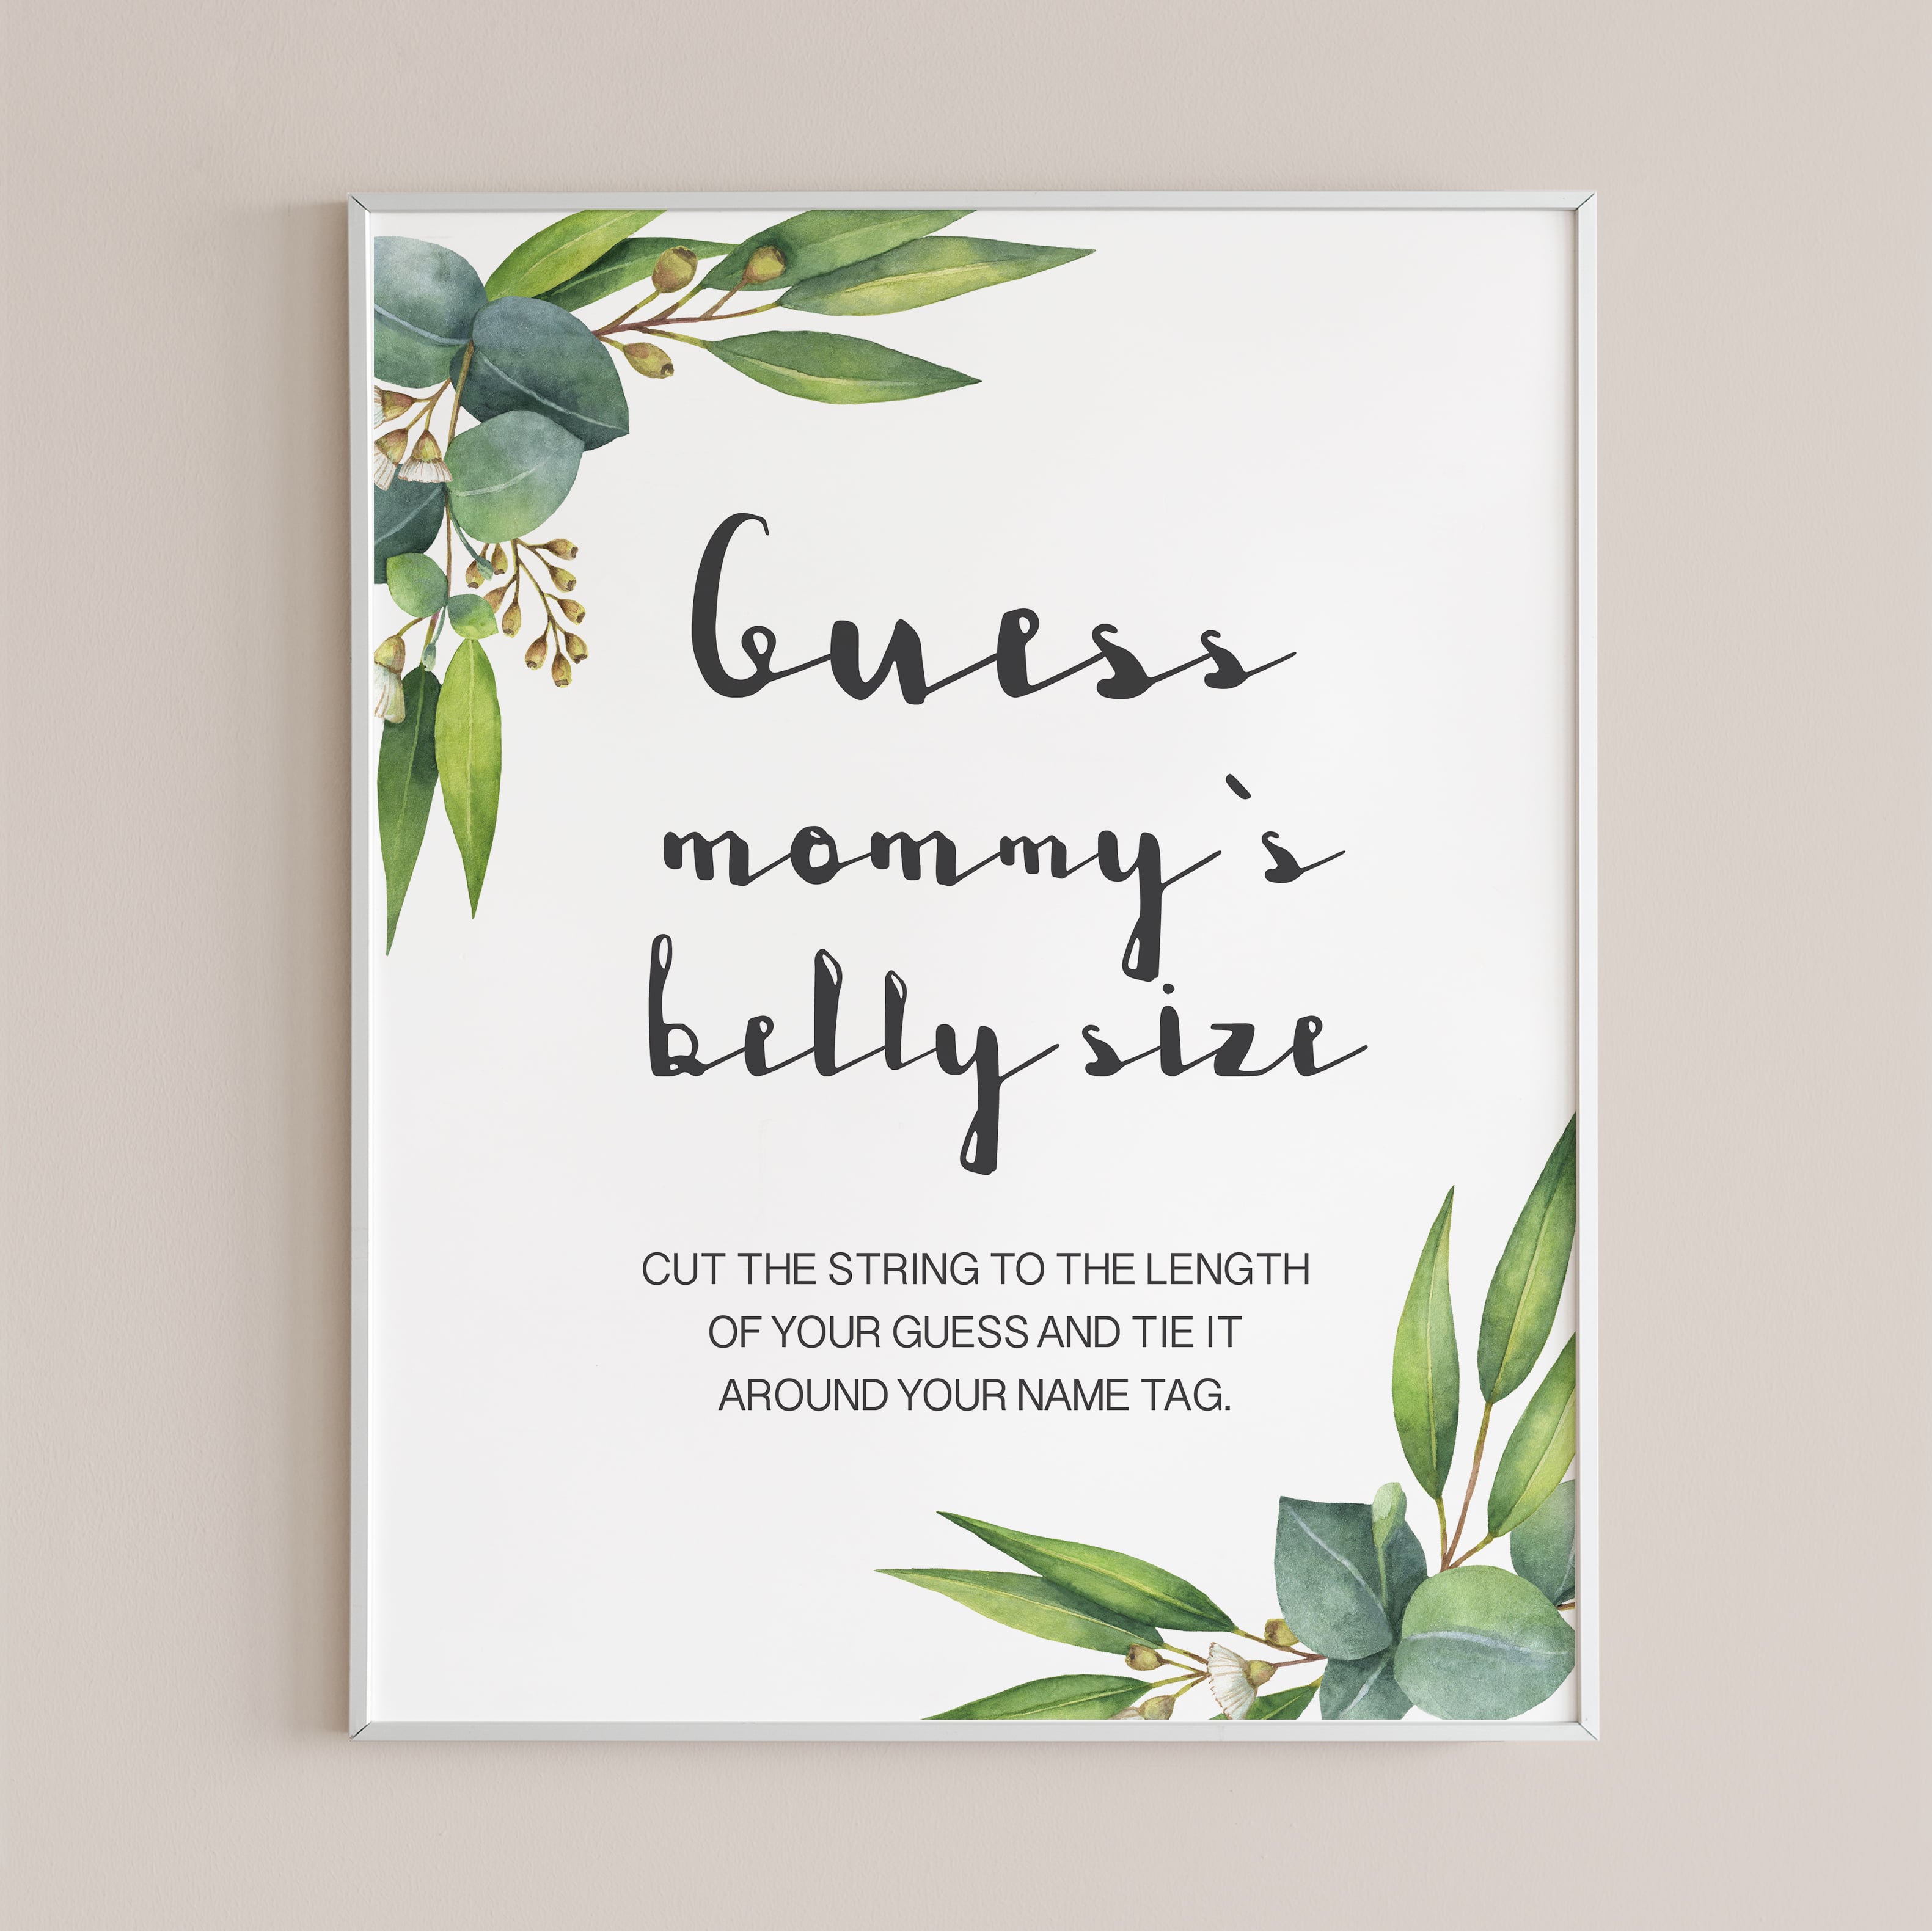 Greenery belly size cards for gender neutral baby shower by LittleSizzle